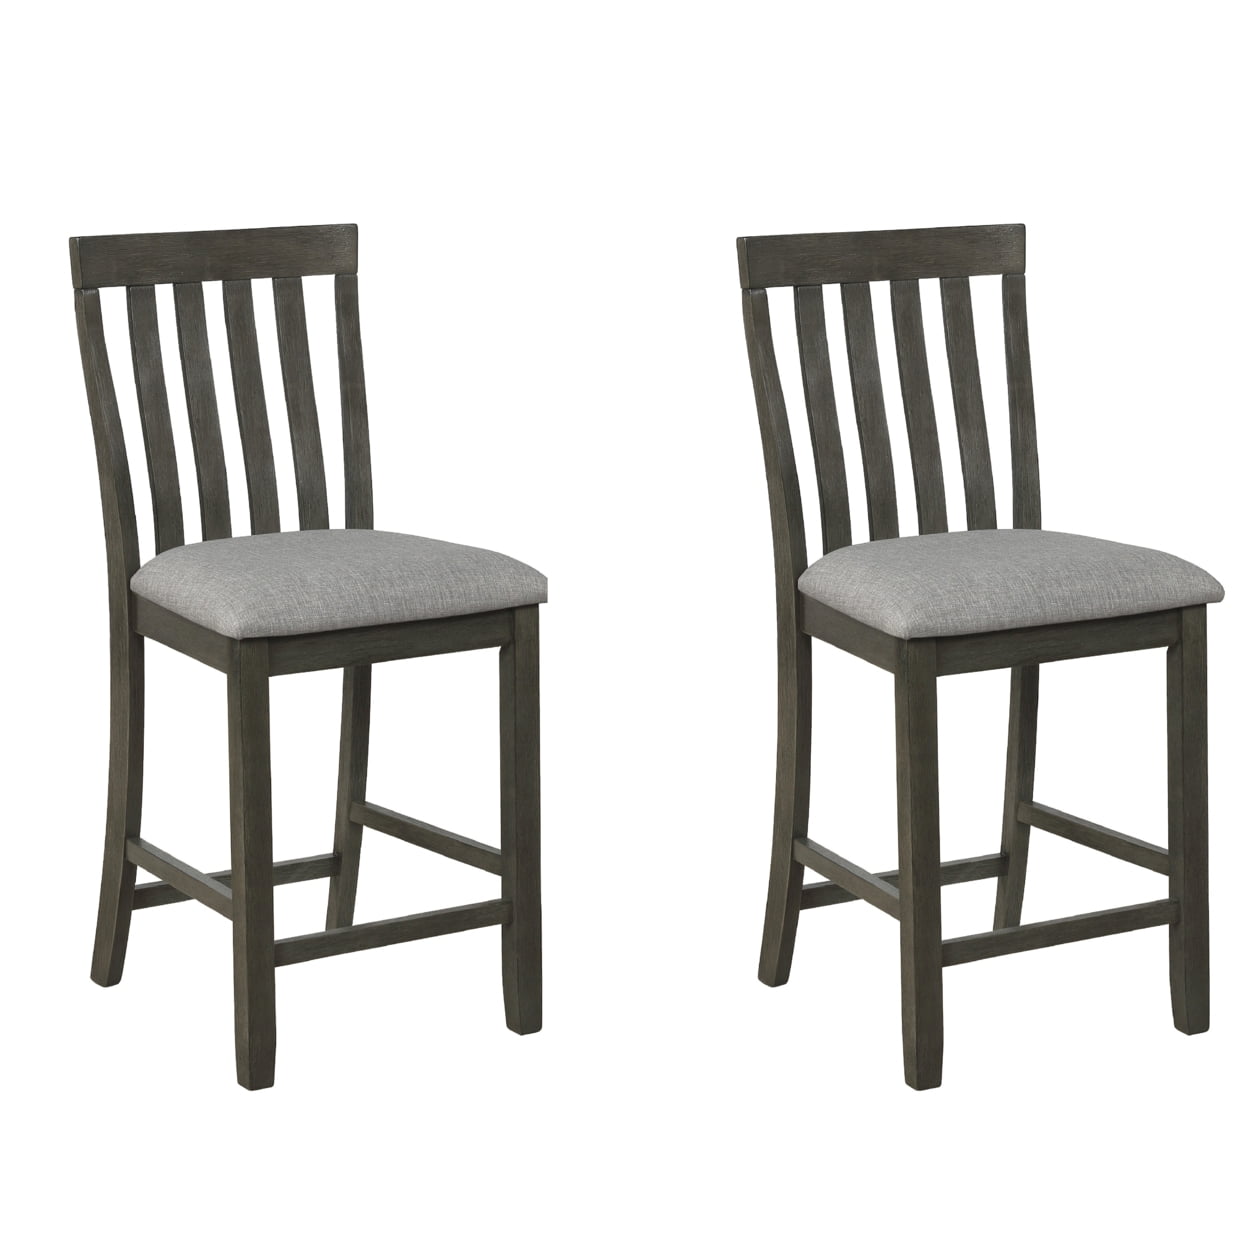 Picture of Benjara BM215207 Vertical Slatted Back Wooden Counter Chair - Gray - 40.5 x 17 x 19 in. - Set of 2